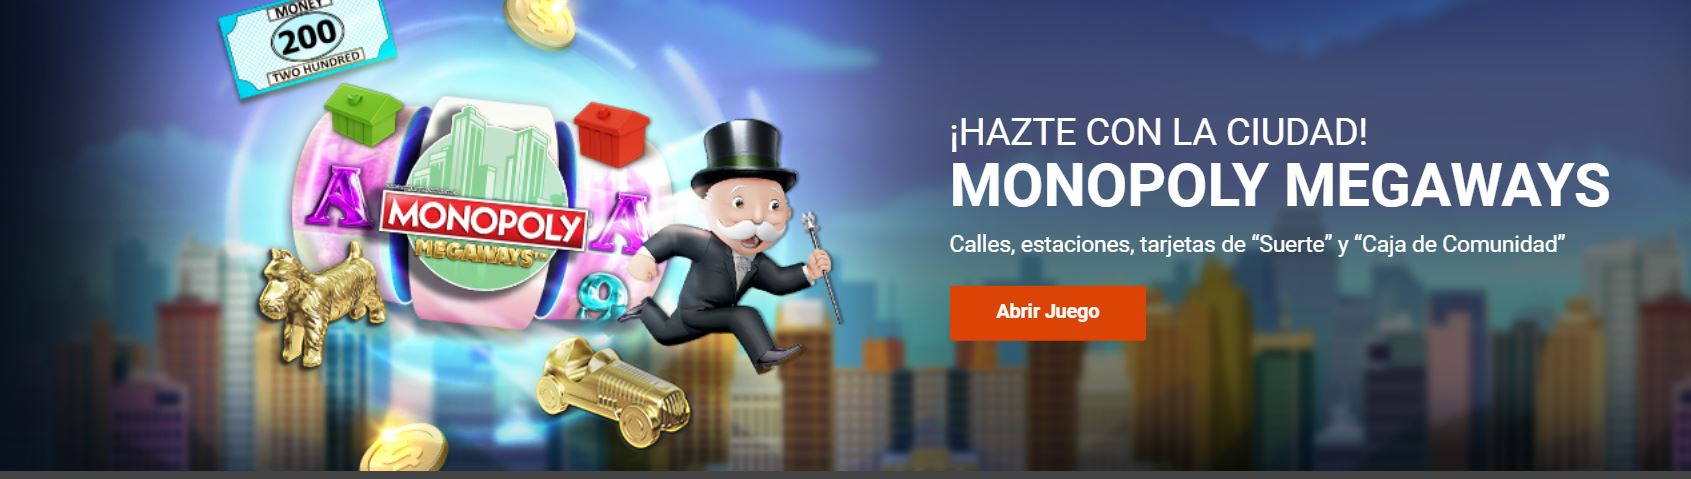 Discover monopoly. one of the most popular online casino games.